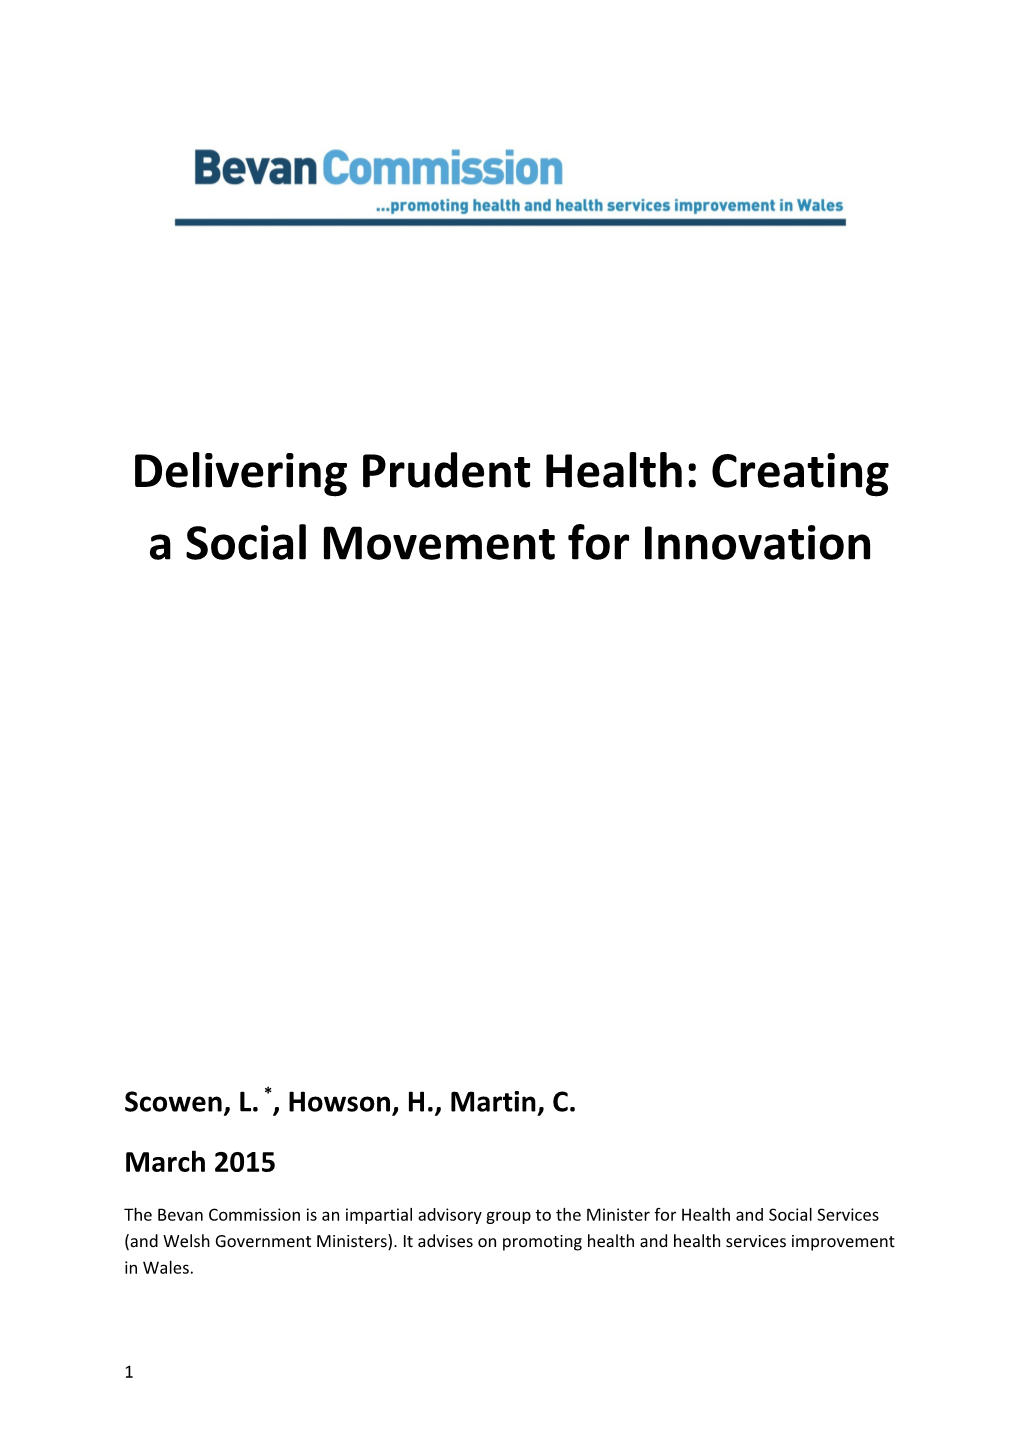 Delivering Prudent Health: Creating a Social Movement for Innovation